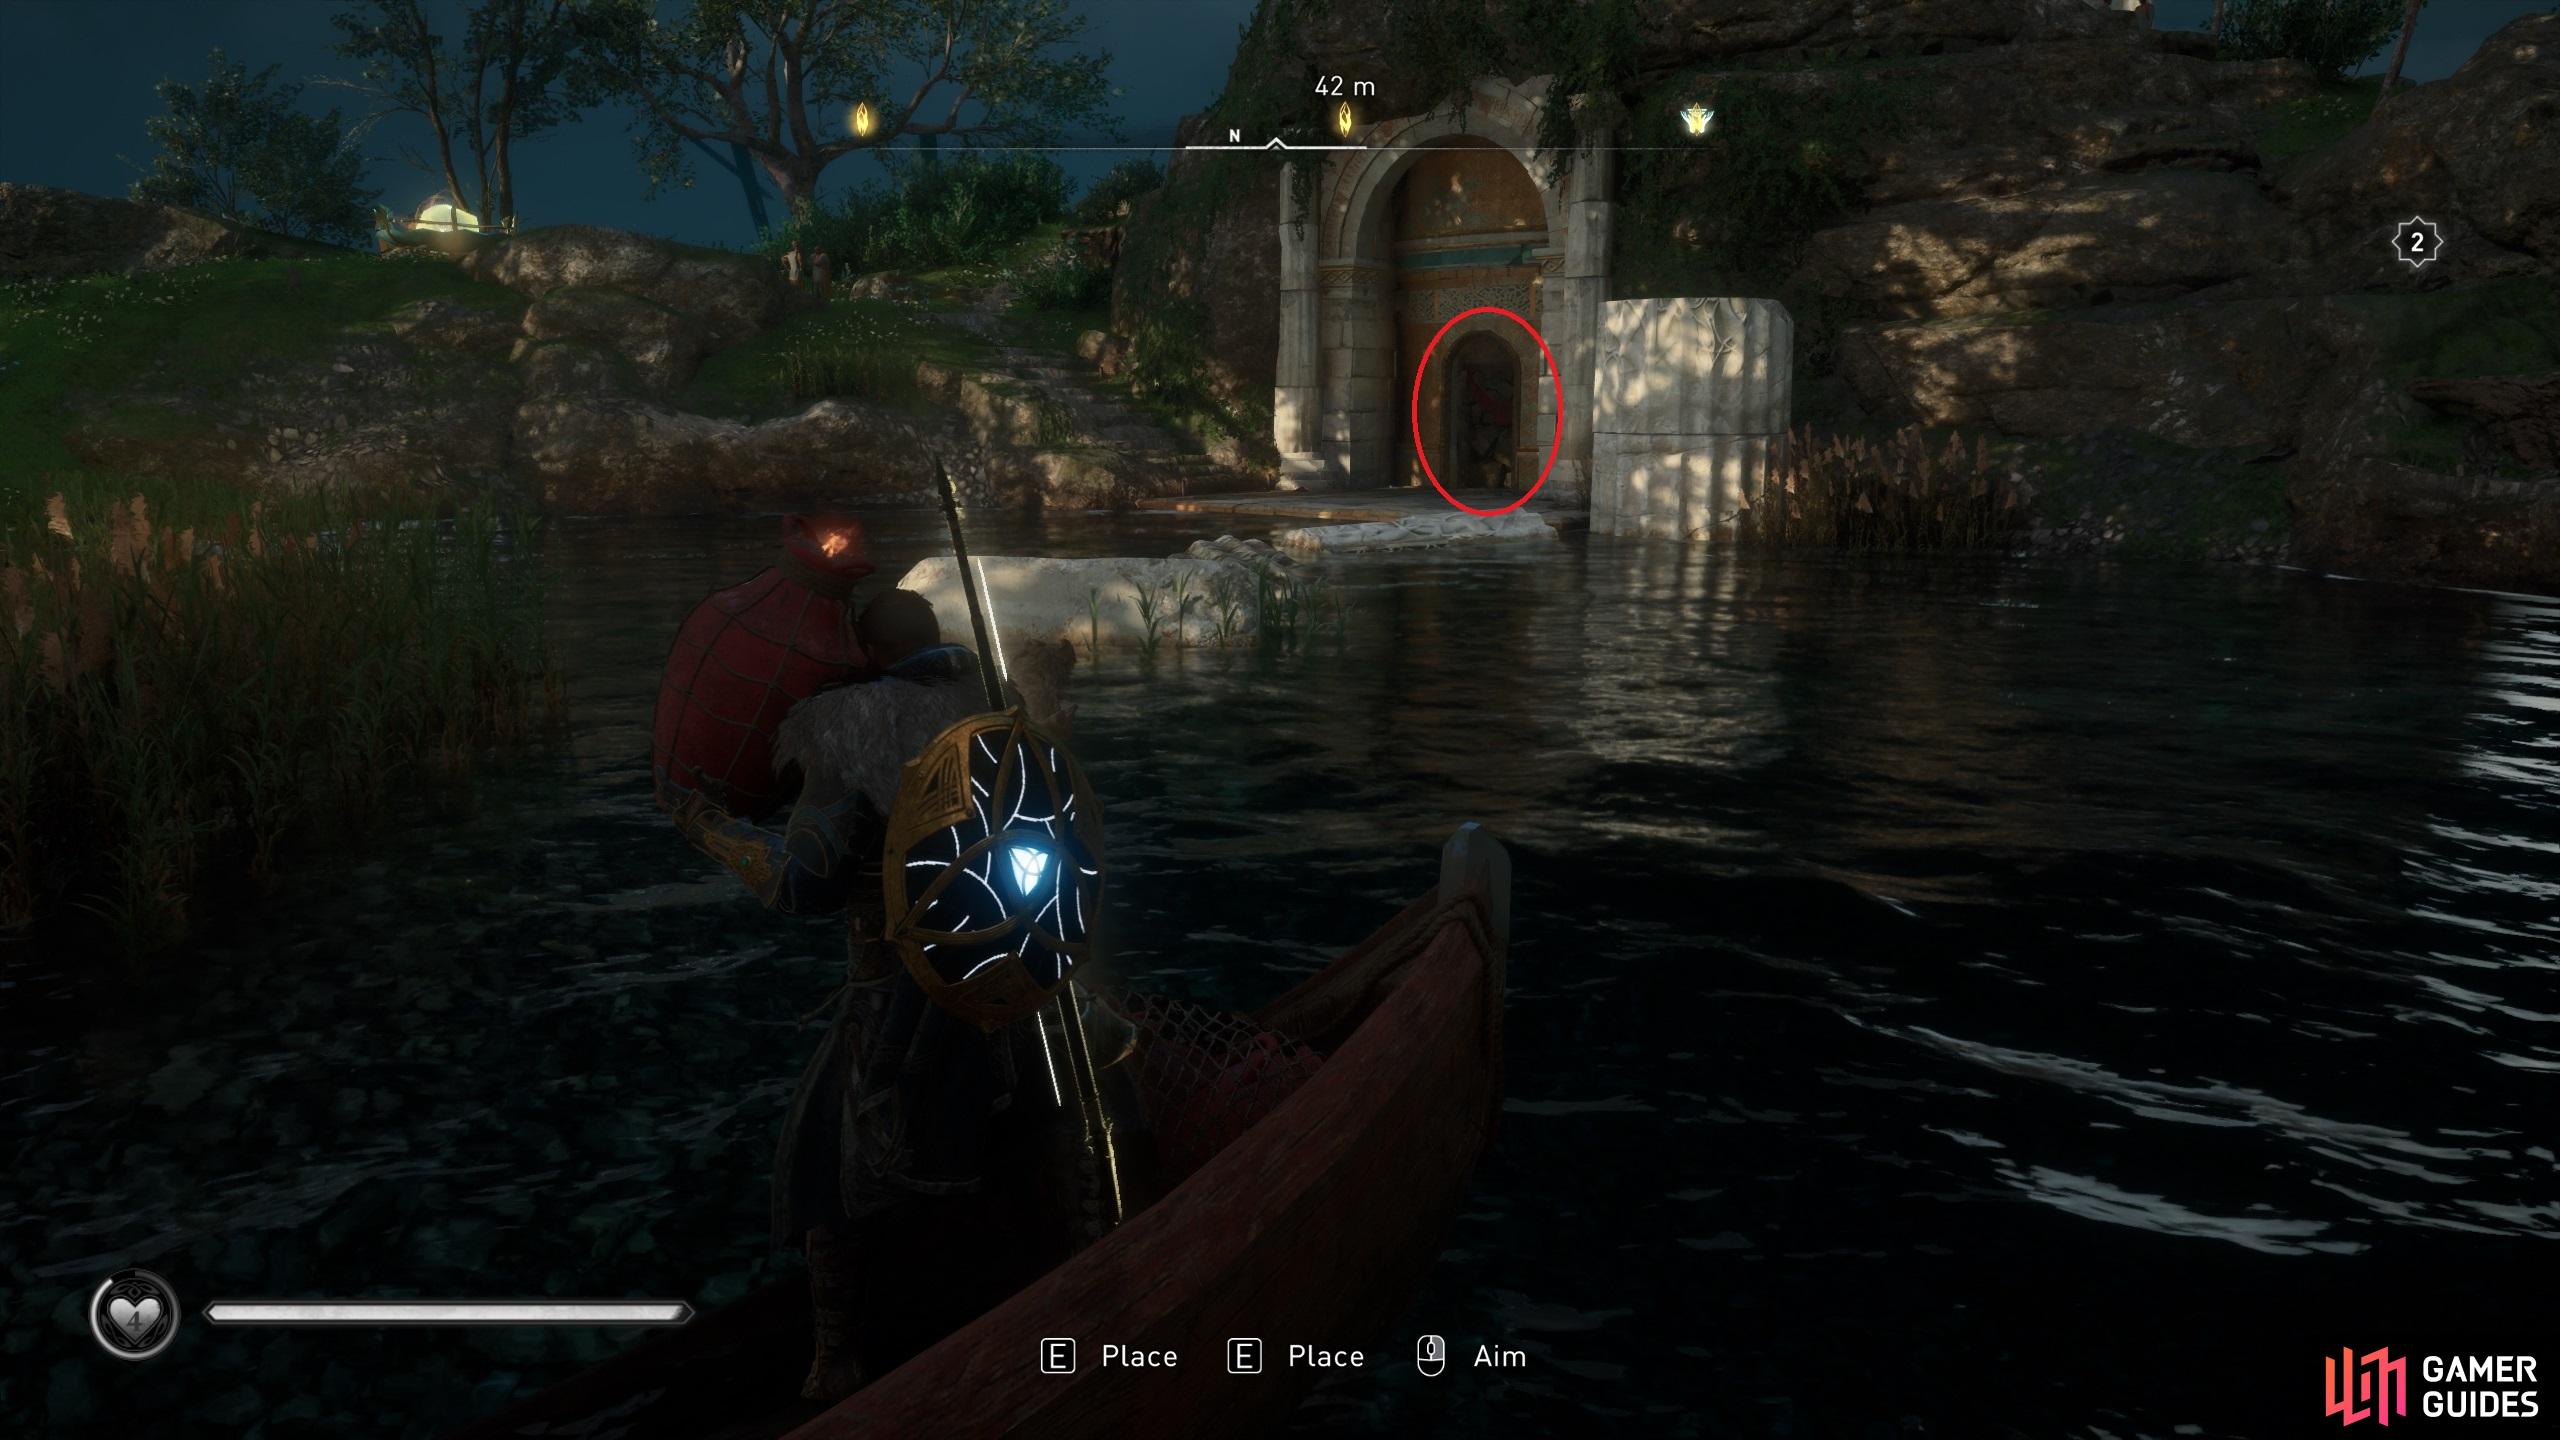 Take the fire pot from the boat and use it to destroy the barricade, circled here in red.